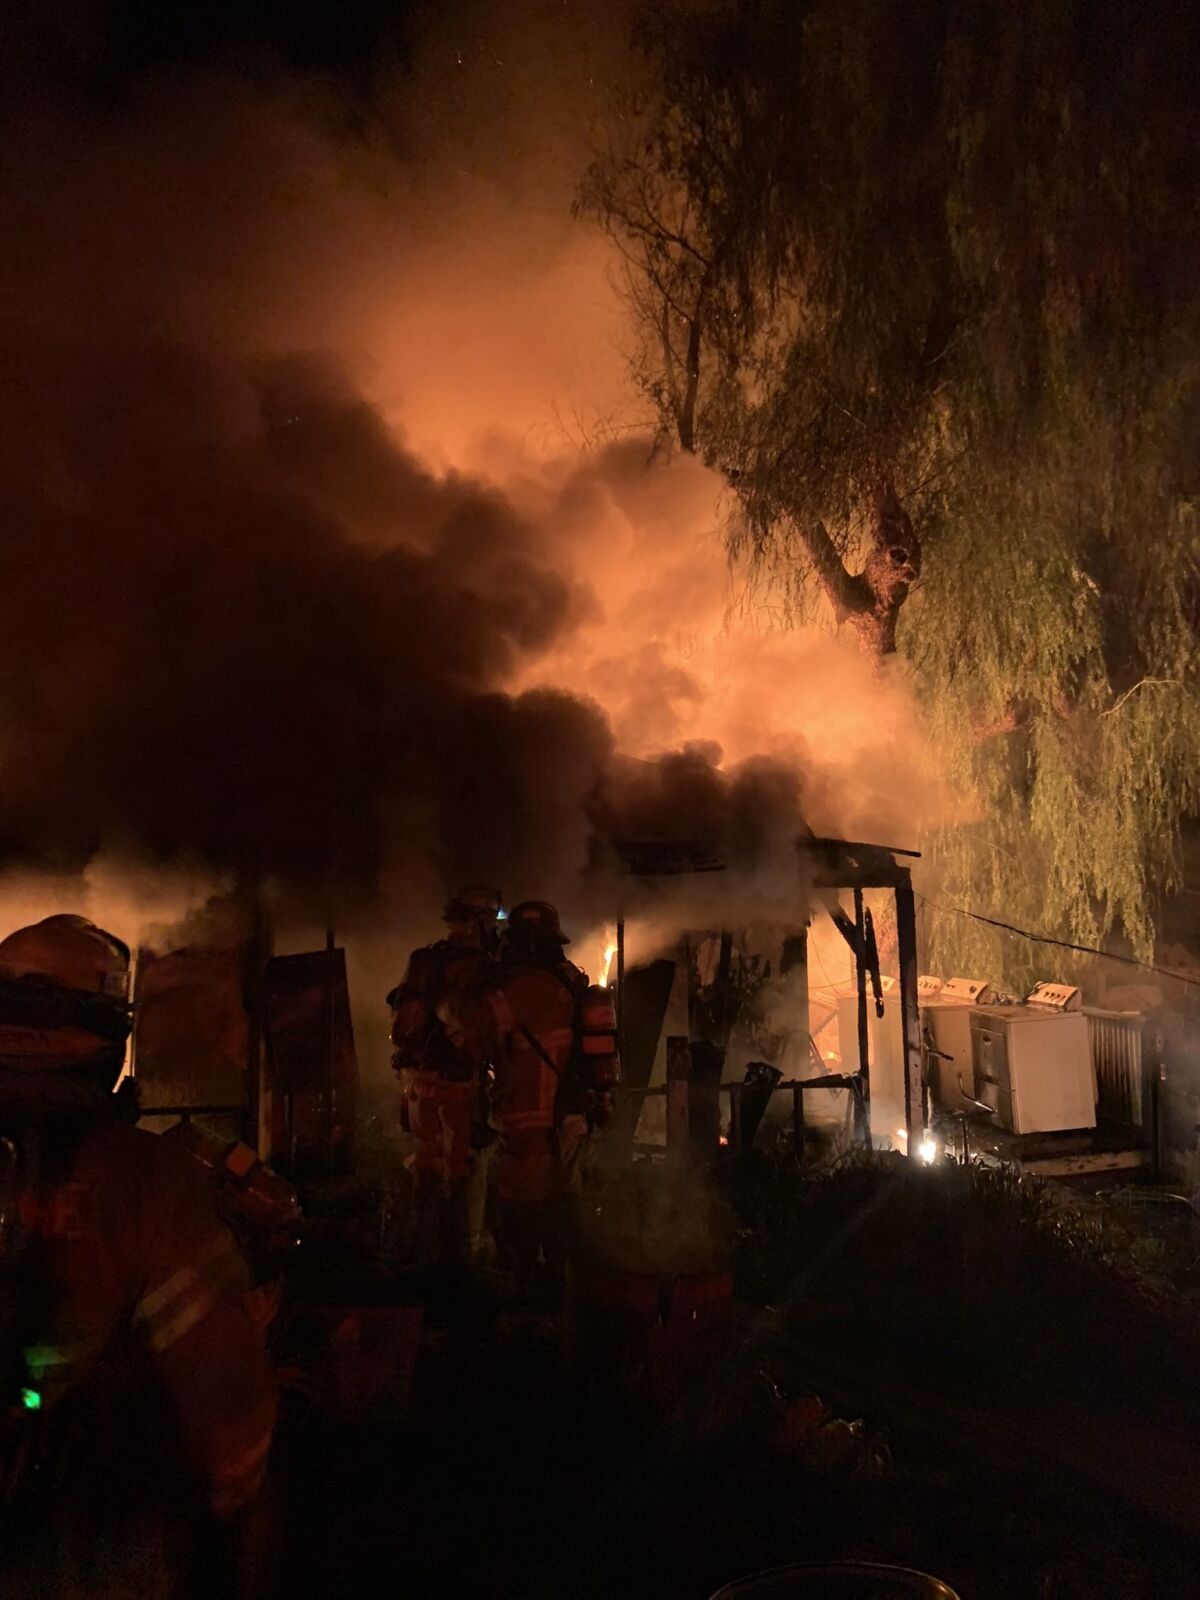 Firefighters battle a house fire early Monday morning in Ramona. Deborah Hester died inside the engulfed home.